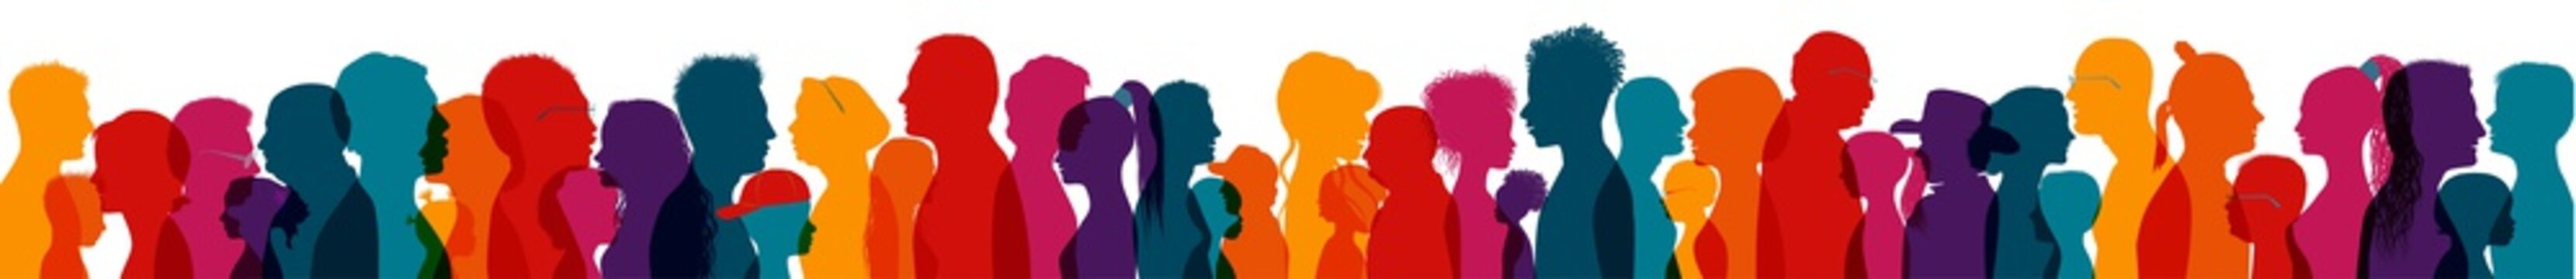 Population and society with diverse people.Communication crowd of families and multiethnic people and of diverse culture.Sociology.Crowding and density of people.Silhouette profile